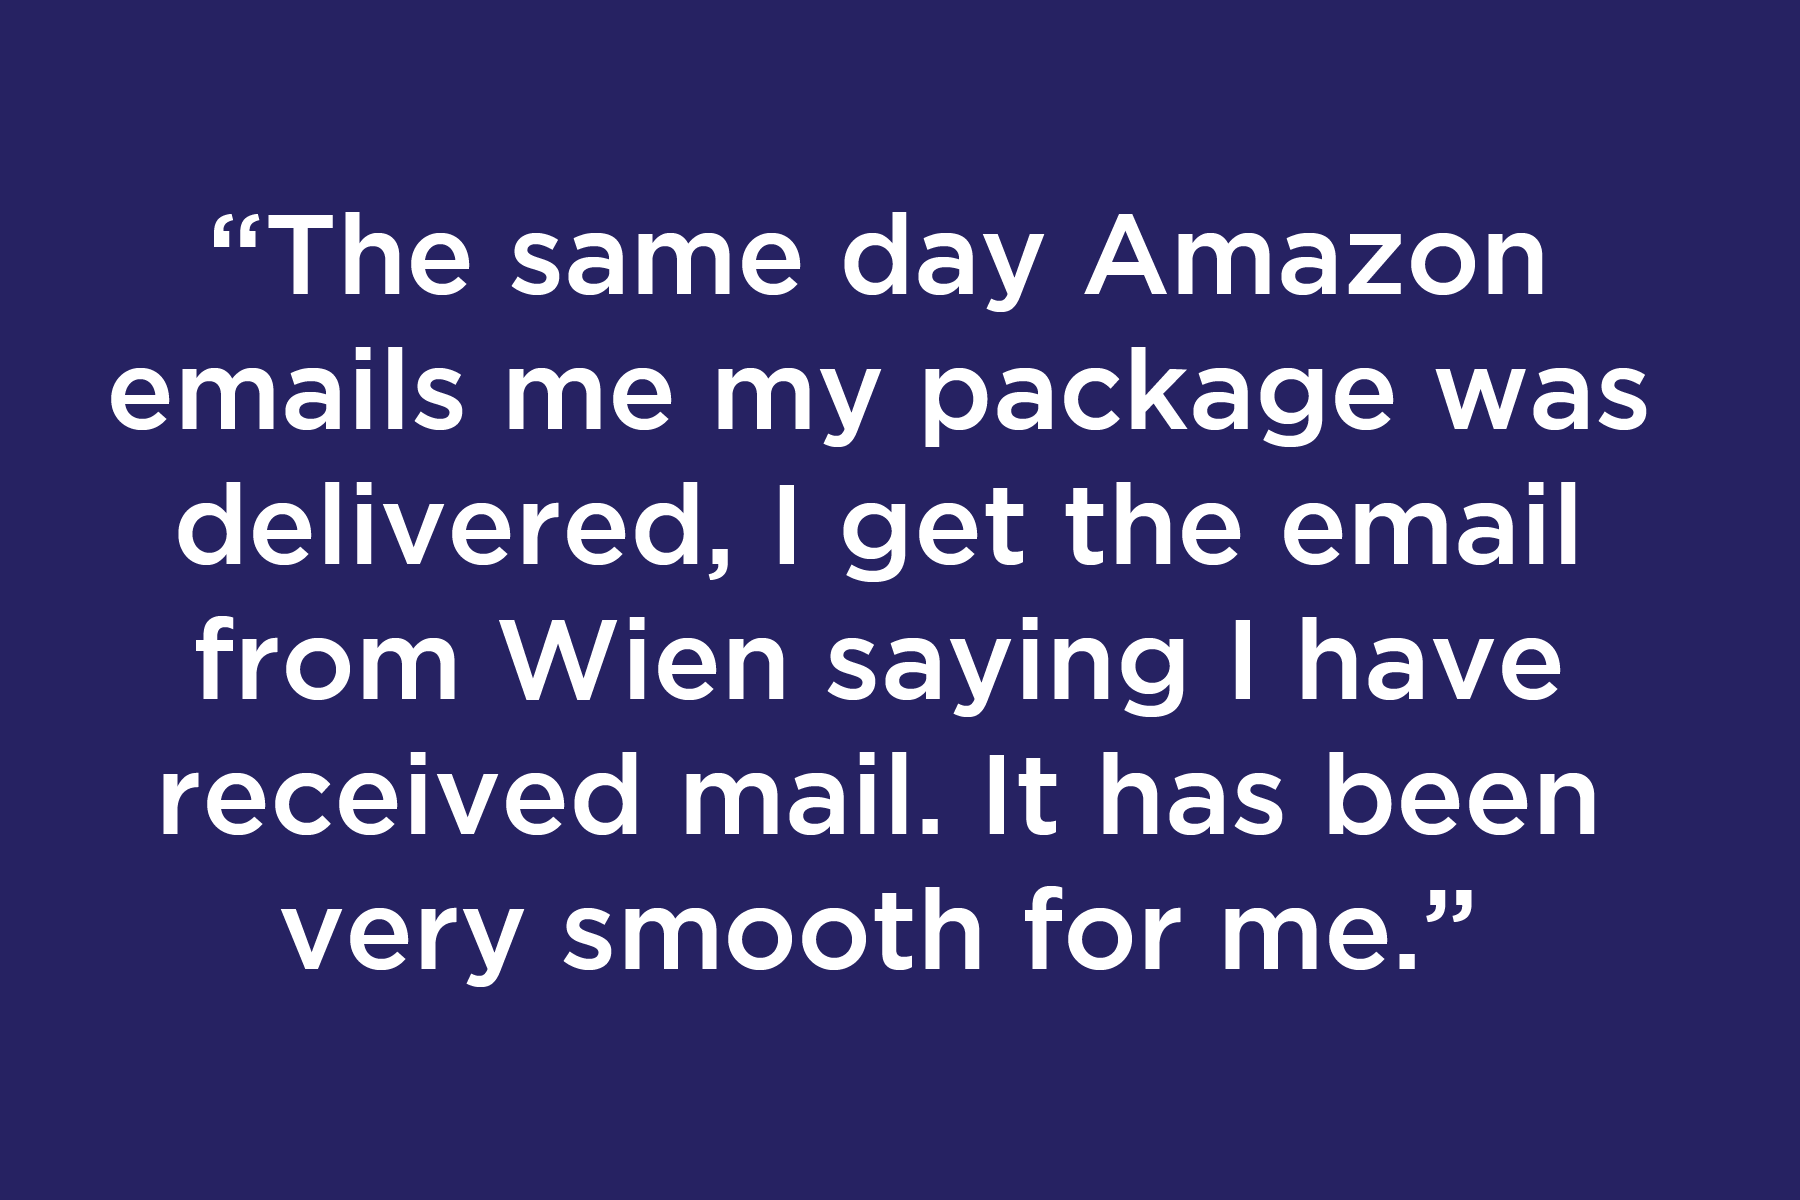 The same day Amazon emails me my package was delivered, I get the email from Wien saying I have received mail. It has been very smooth for me.